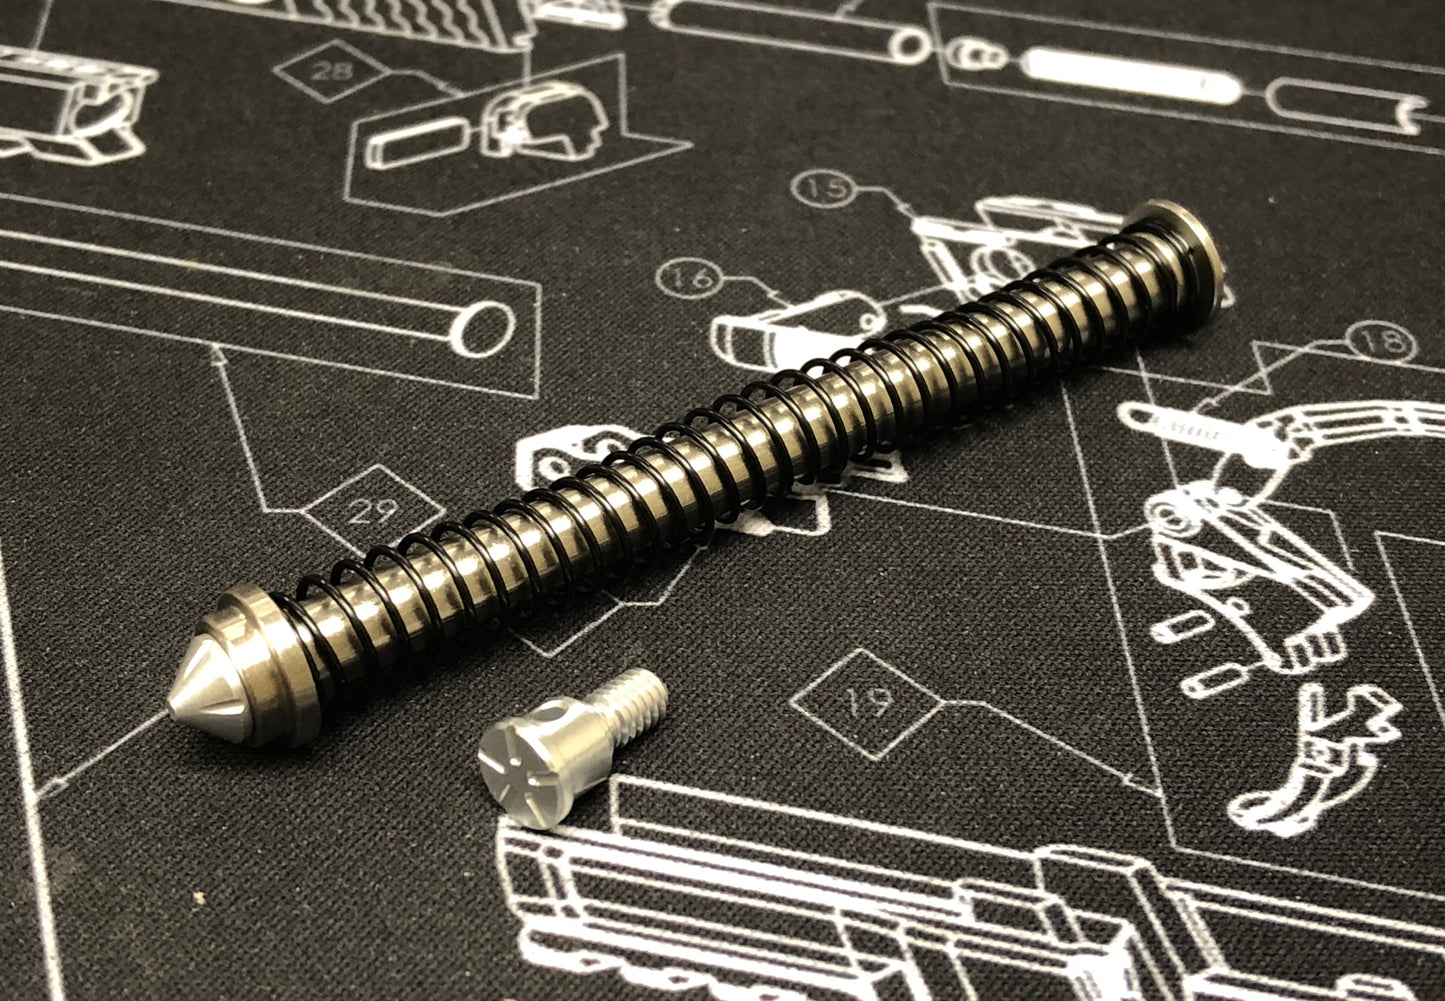 Airsoft Artisan Modular Stainless Recoil Spring Guide for Marui / WE GK GBB series